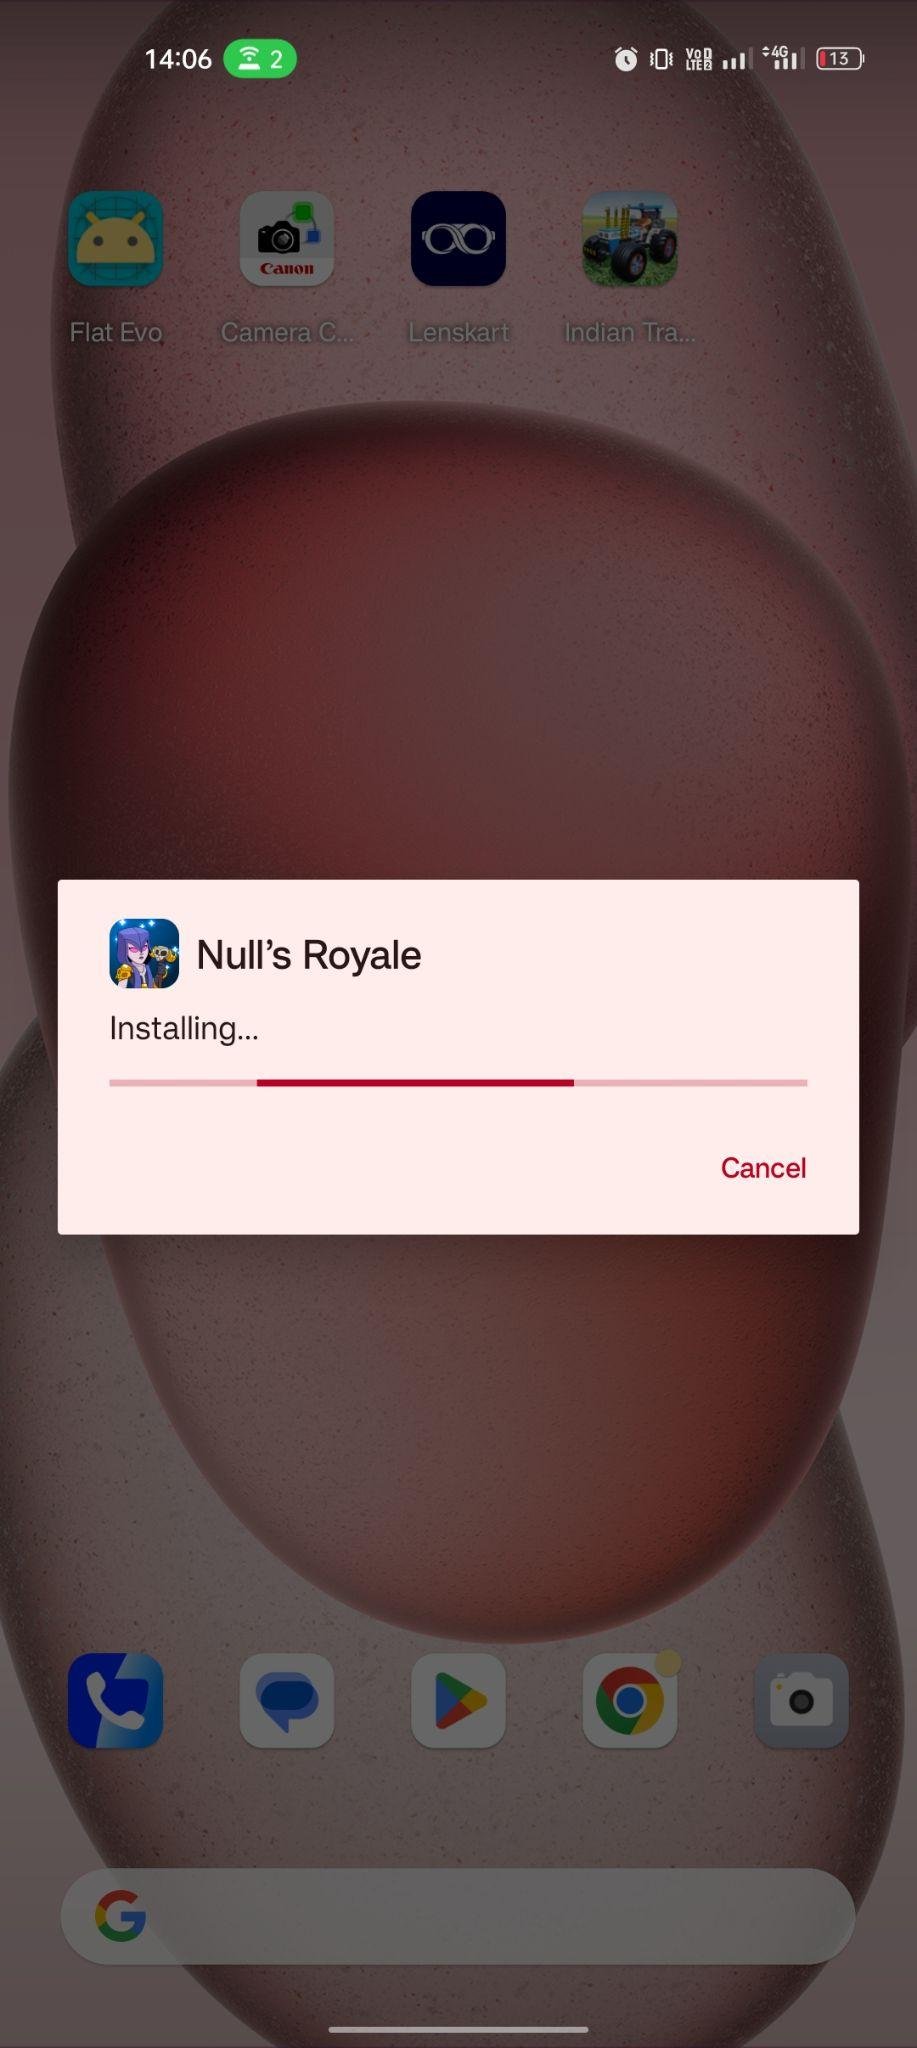 Null’s Royale apk installing